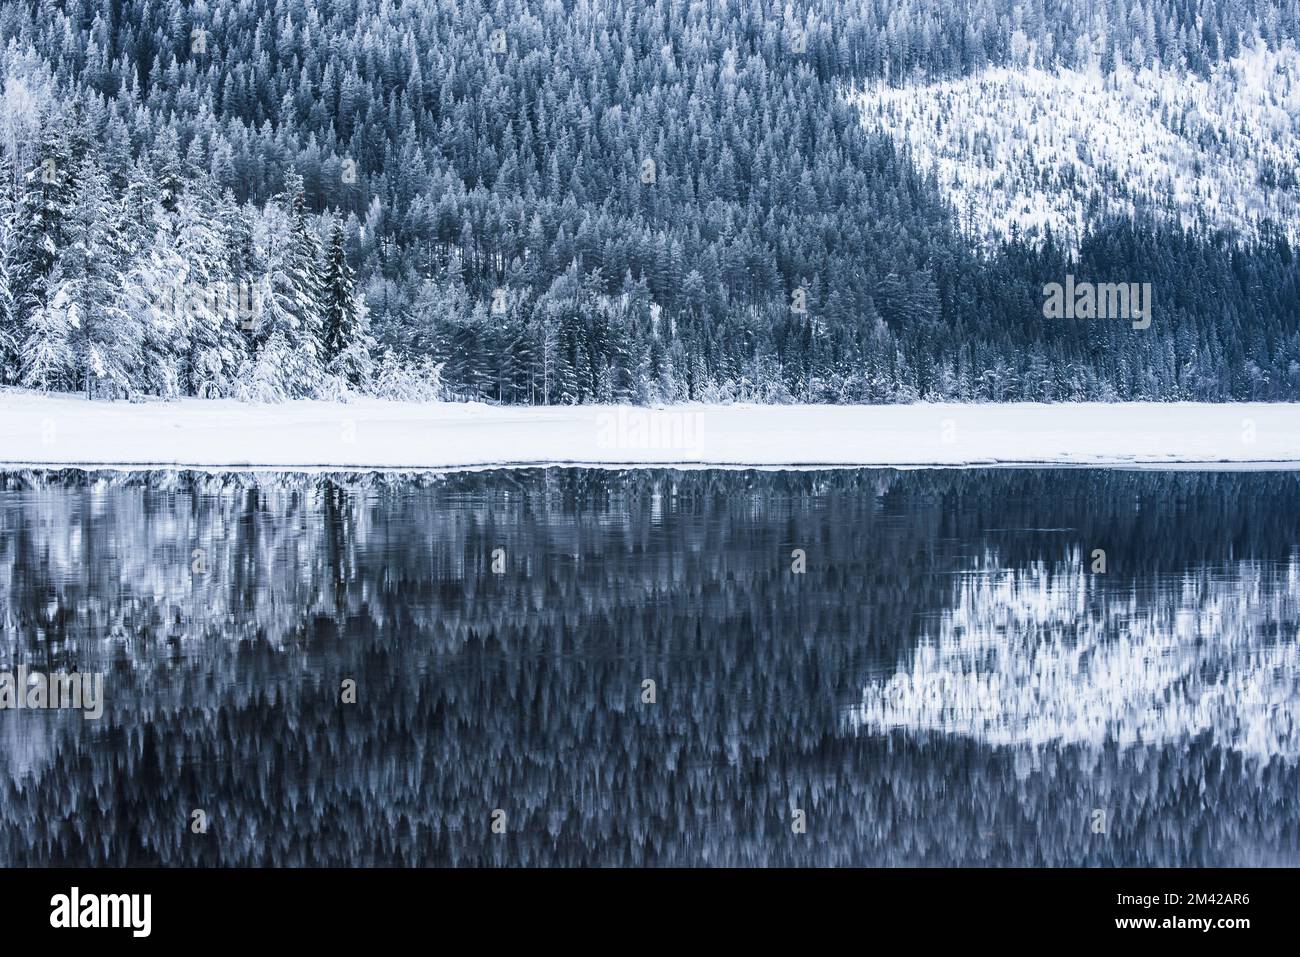 Frosty trees reflected in water, Norway. Stock Photo